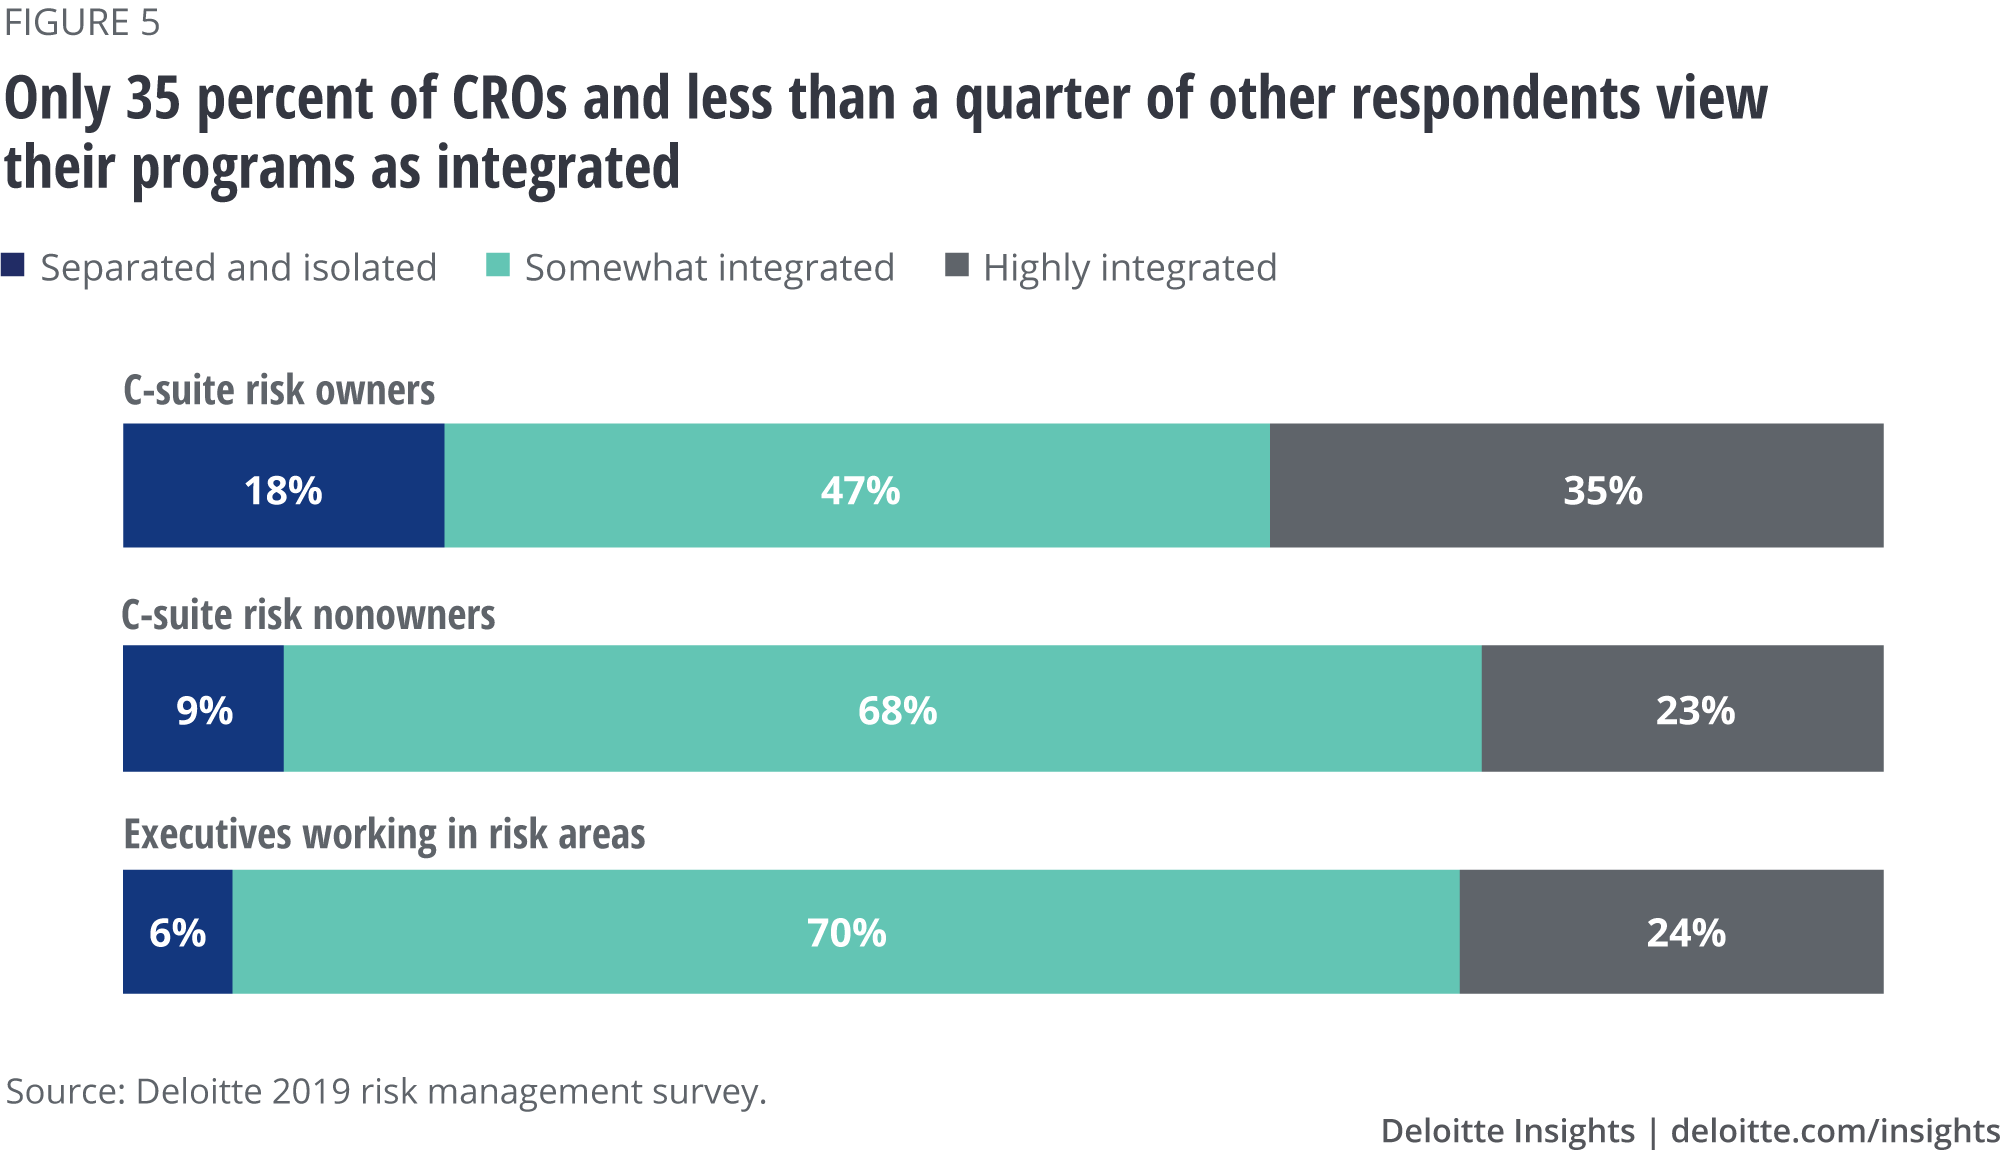 Only 35 percent of CROs and less than a quarter of other respondents view their programs as integrated